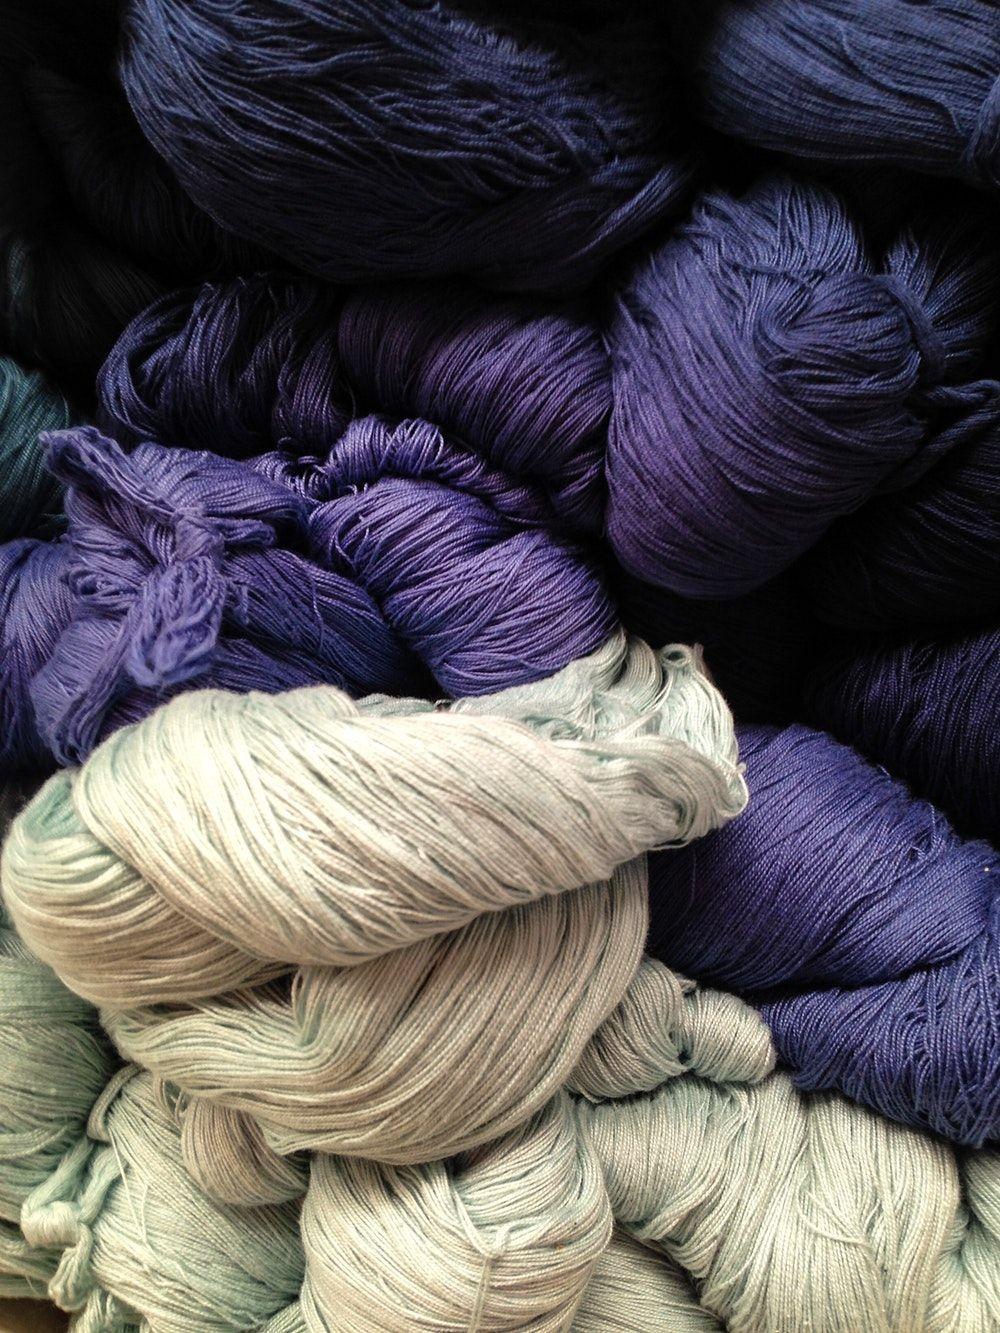 Yarn Picture. Download Free Image